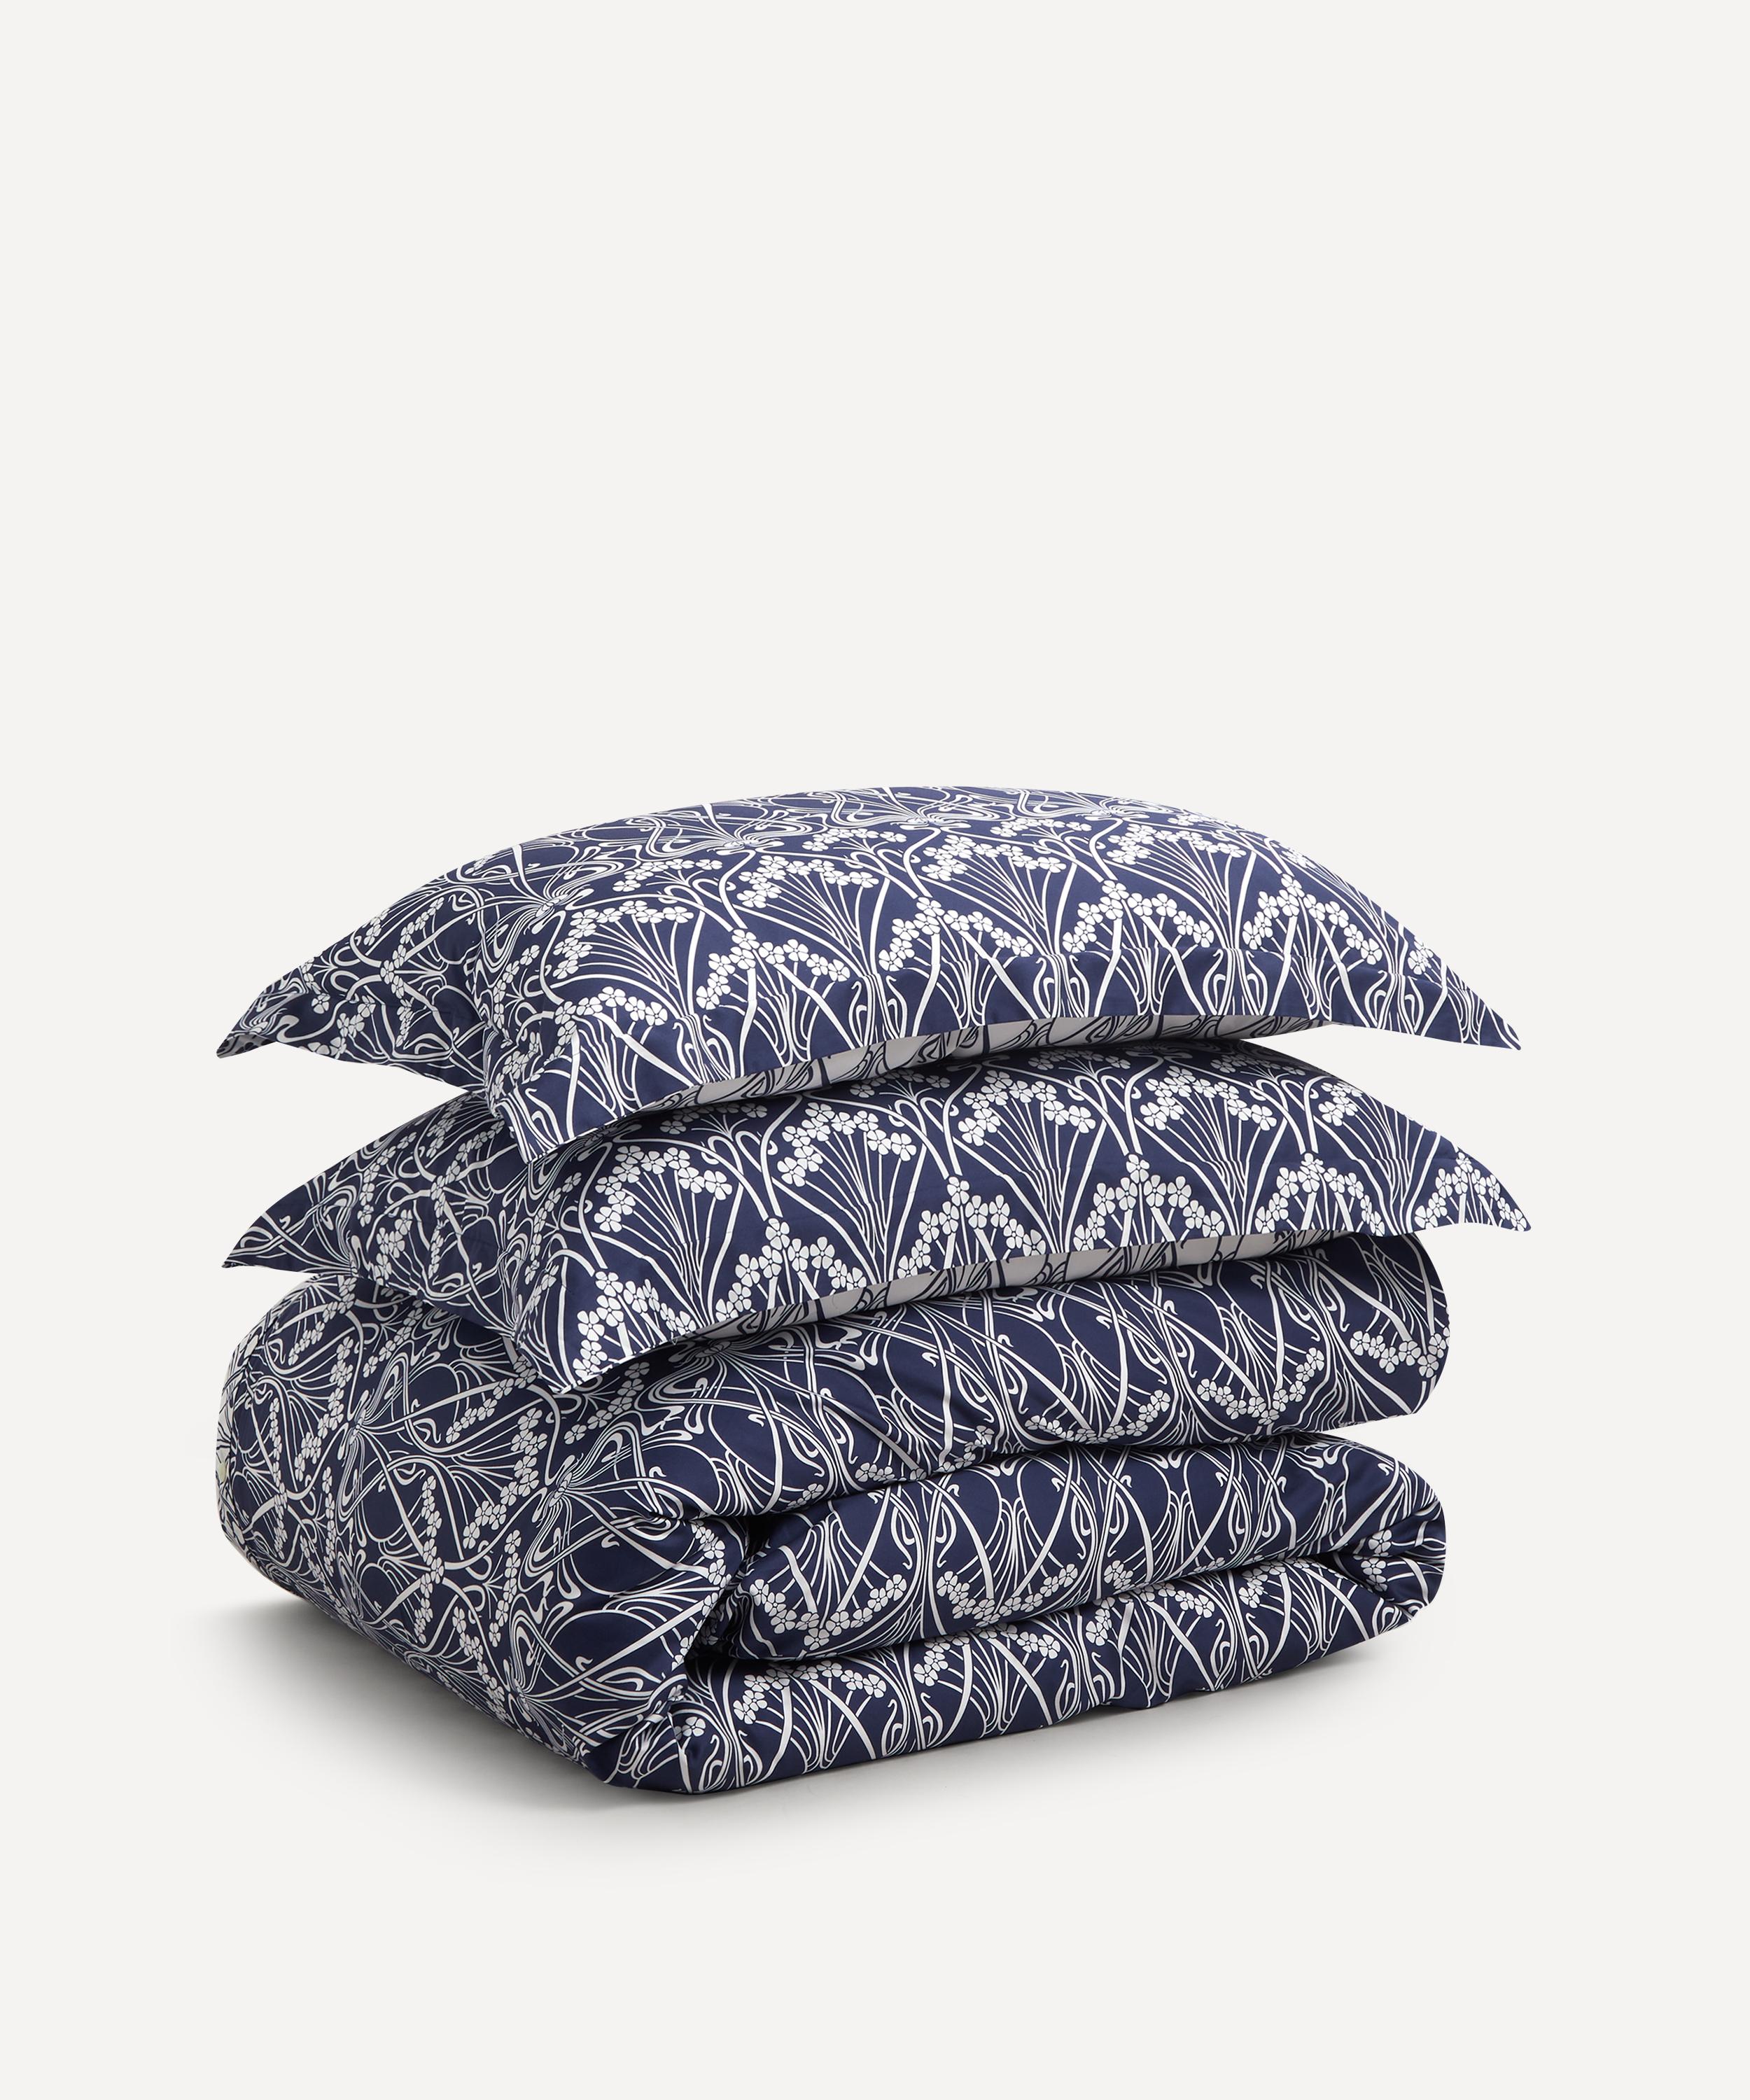 Liberty Ianthe Cotton Sateen Double Duvet Cover Set In Navy